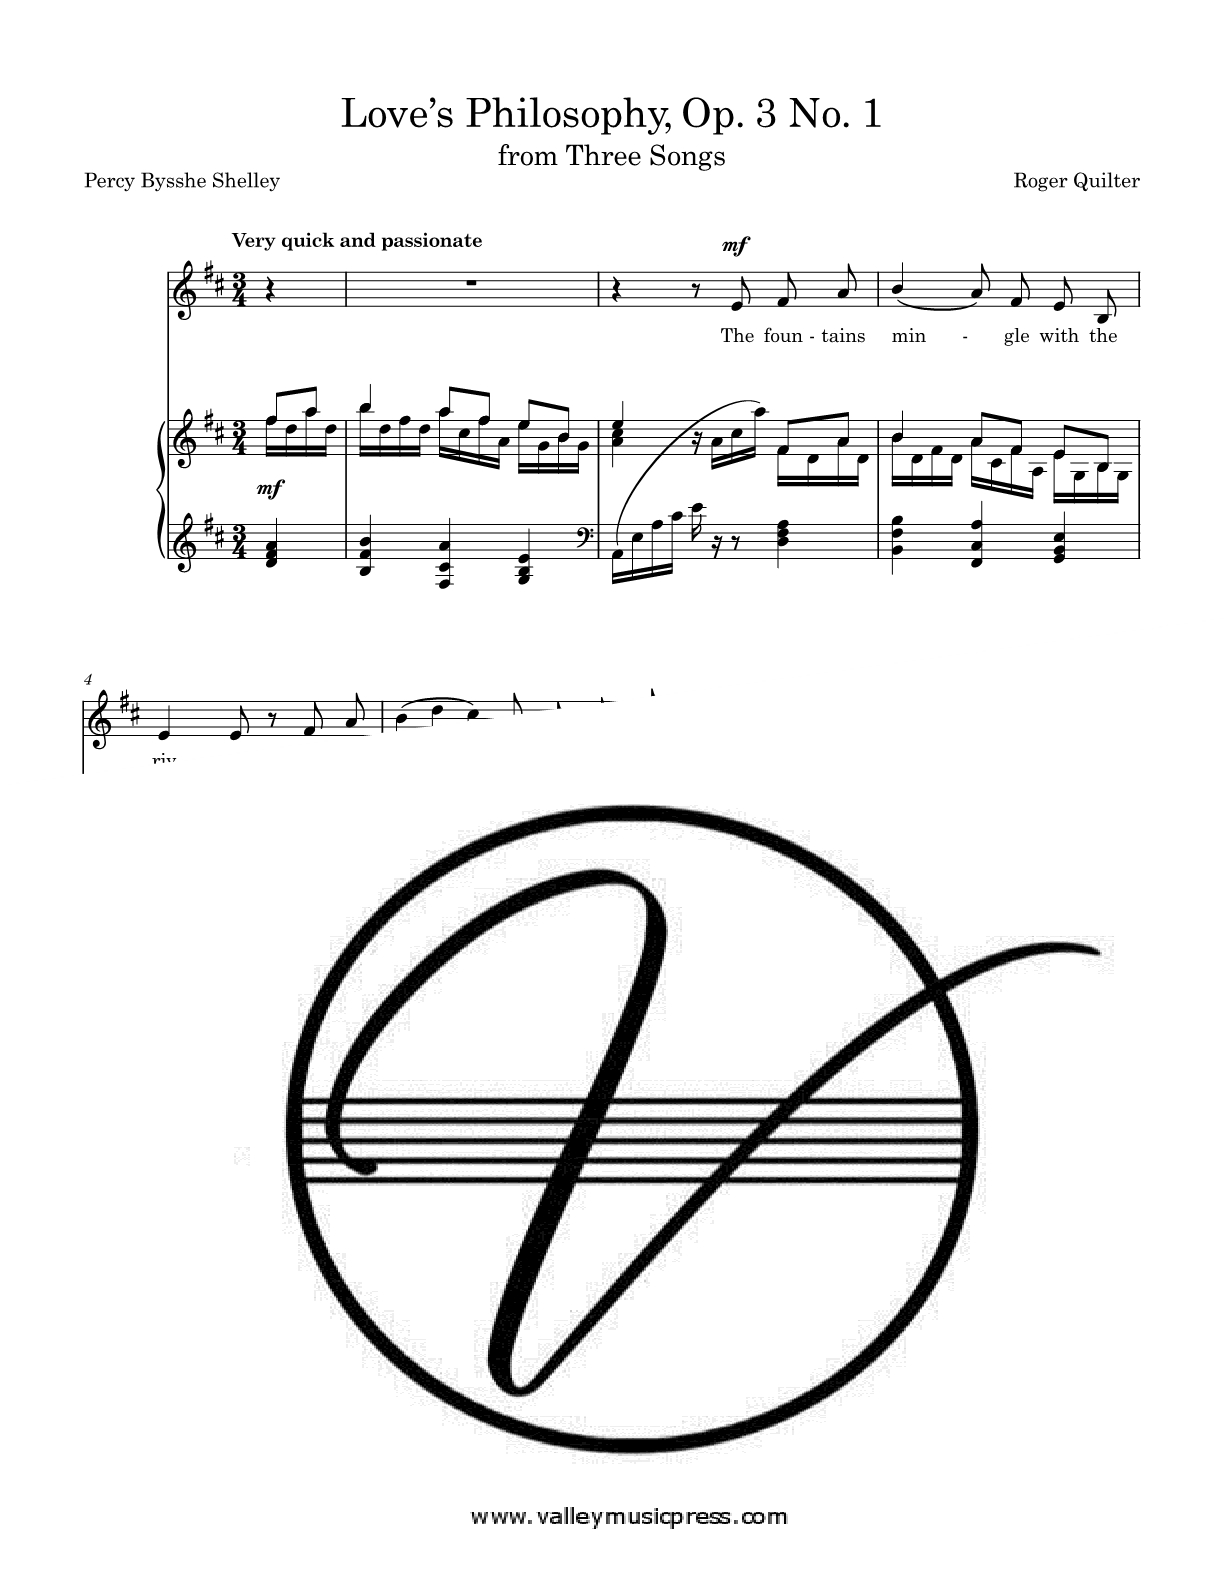 Quilter - Love's Philosophy Op. 3 No. 1 (Voice) - Click Image to Close